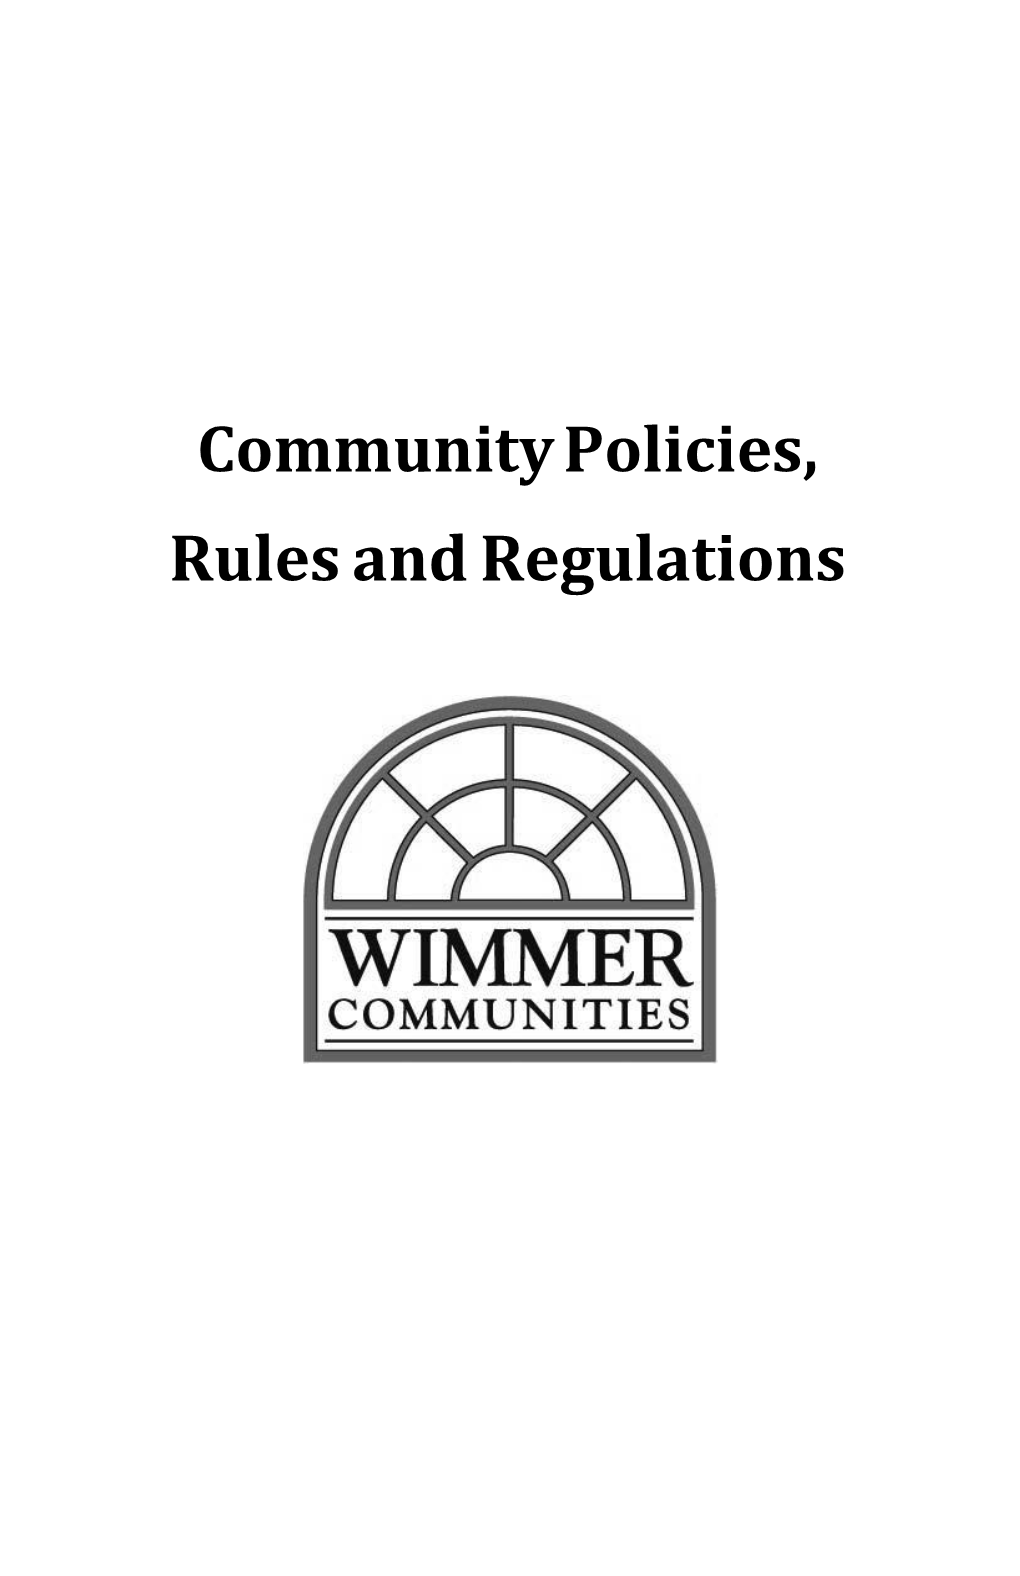 Community Policies, Rules and Regulations